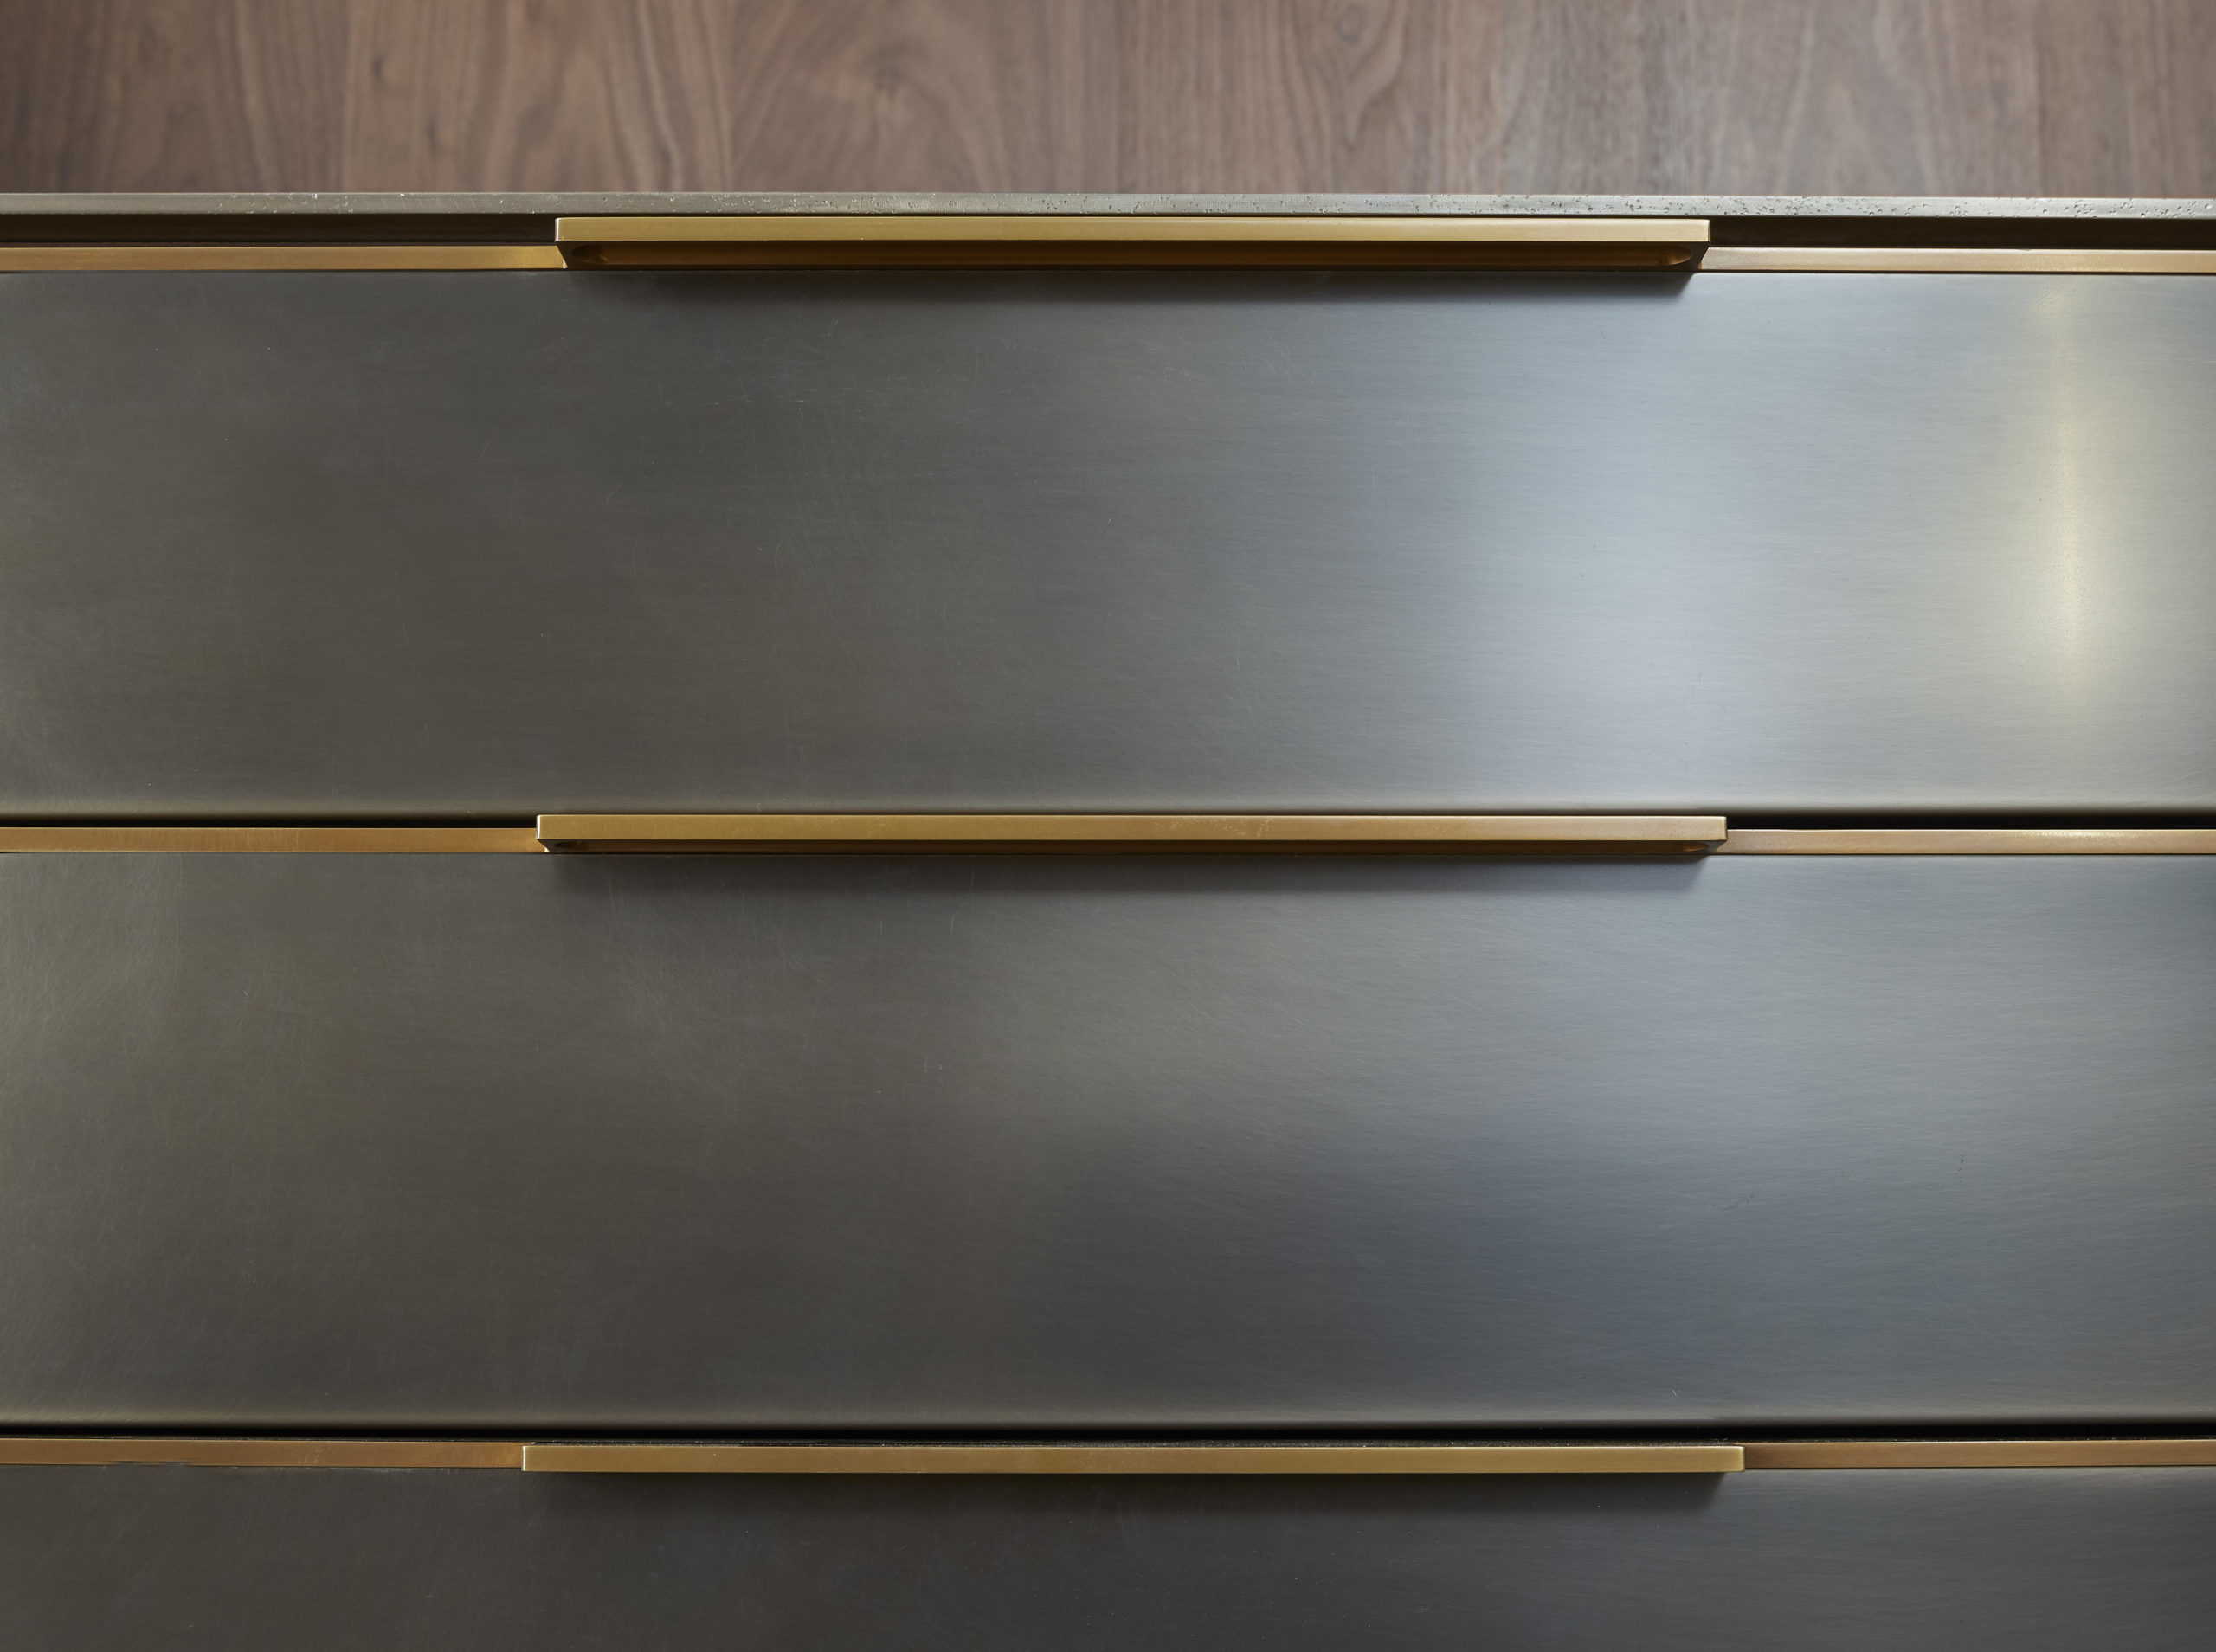 amuneal_products_WNWN_NYDC_5Blackened-Stainless-Bar-Detail-Drawer-Fronts_nycshowroom-scaled-1